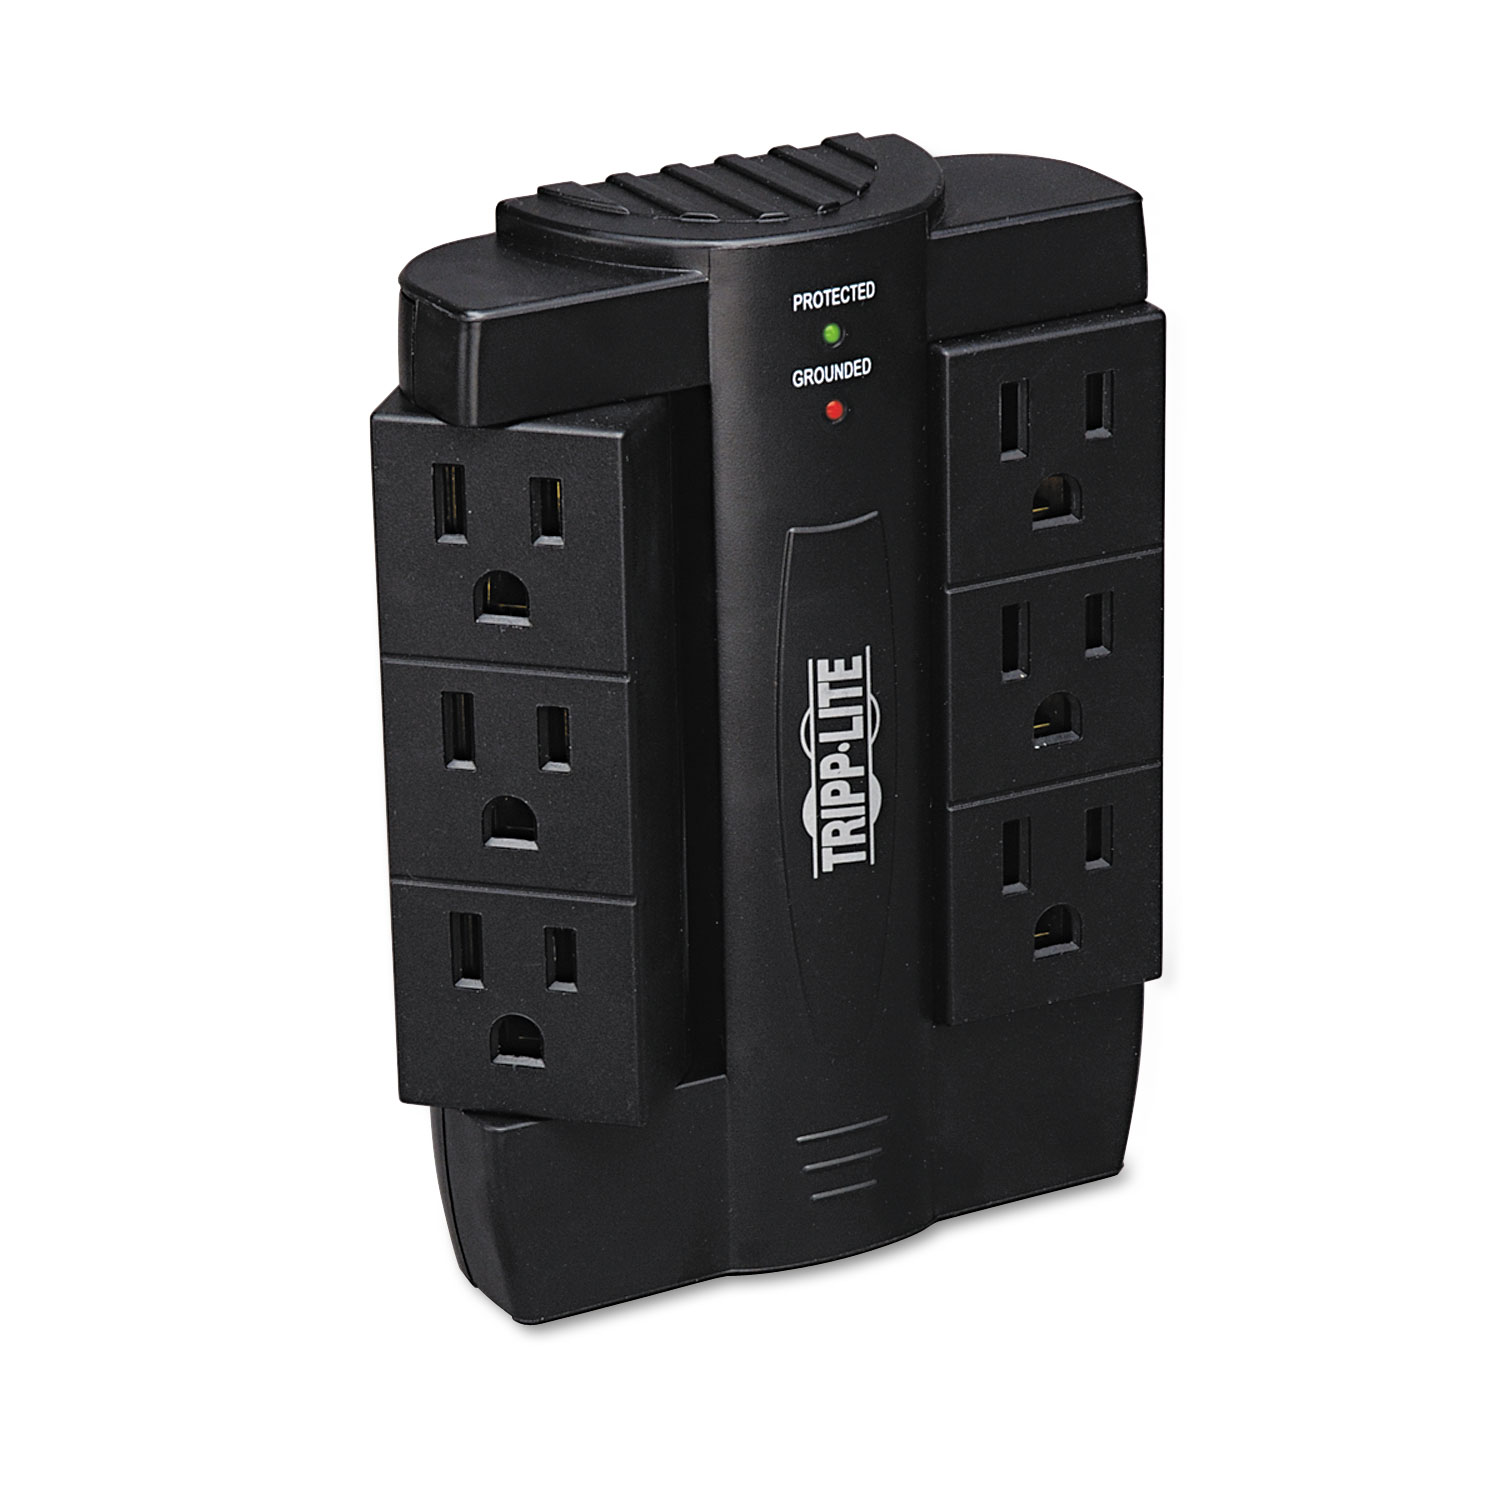  Tripp Lite SWIVEL6 Protect It! Surge Protector, 6 Rotatable Outlets, Direct-Plug In, 1500 Joules (TRPSWIVEL6) 